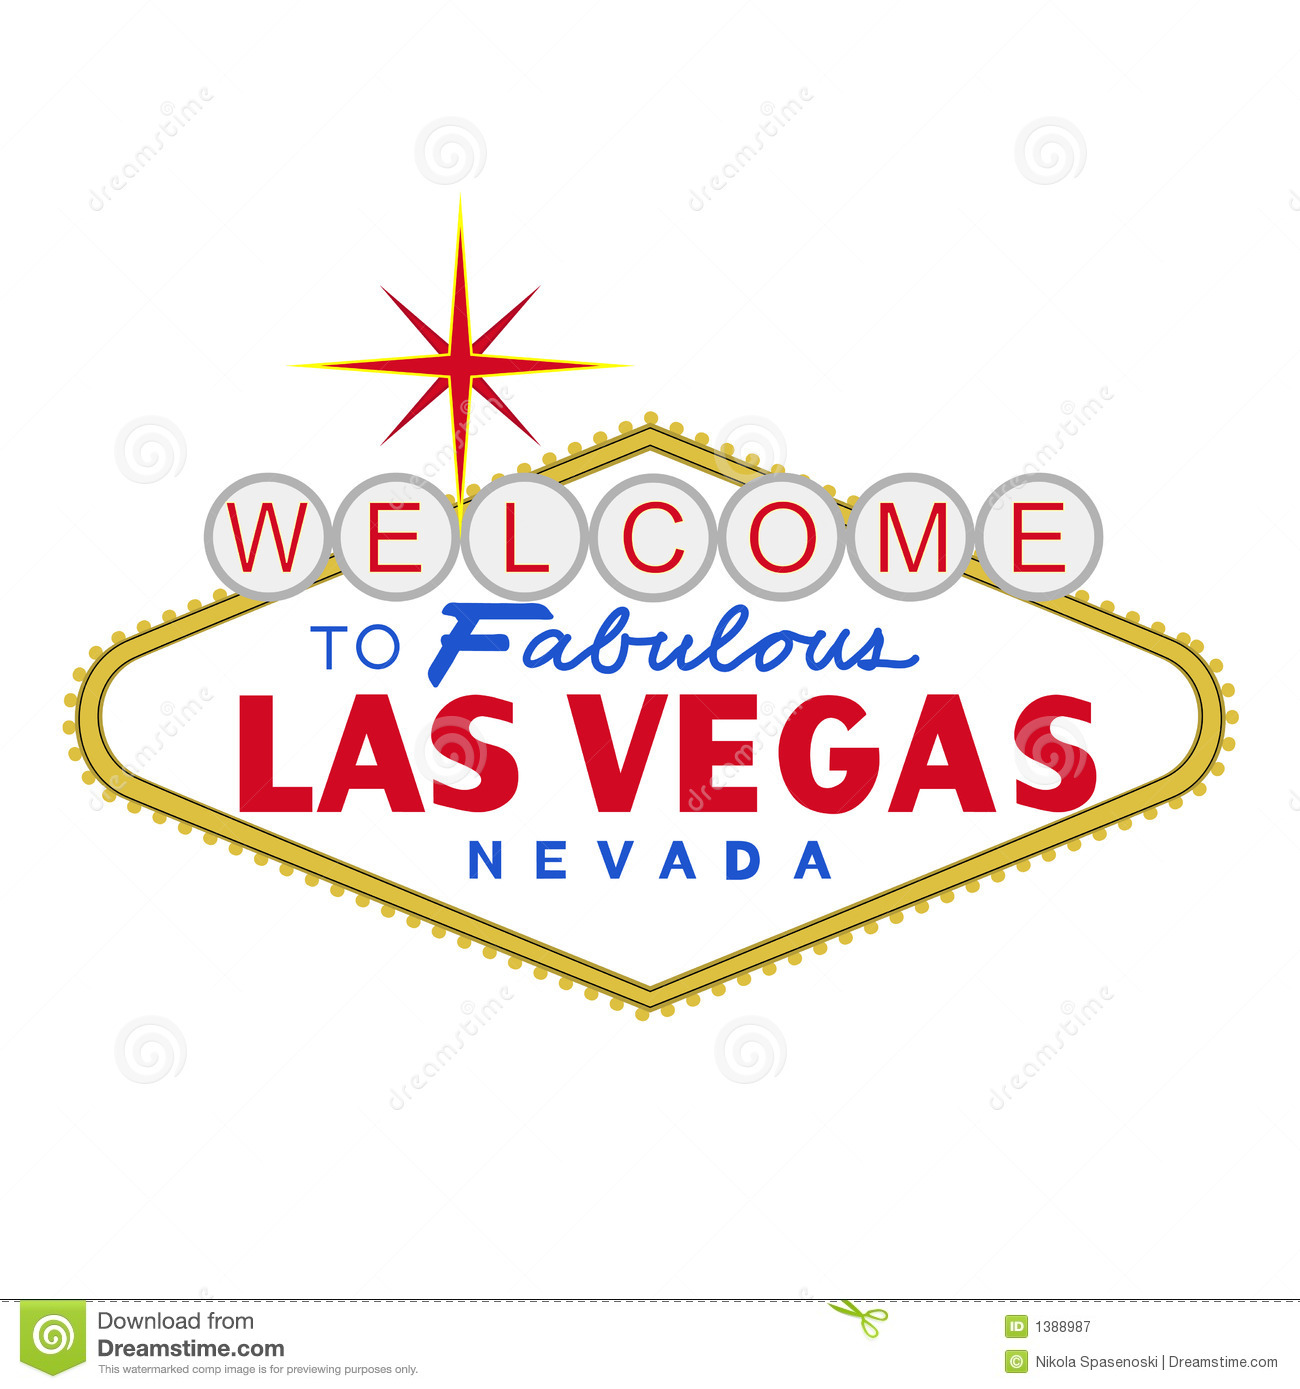 Welcome to las vegas sign clip art.